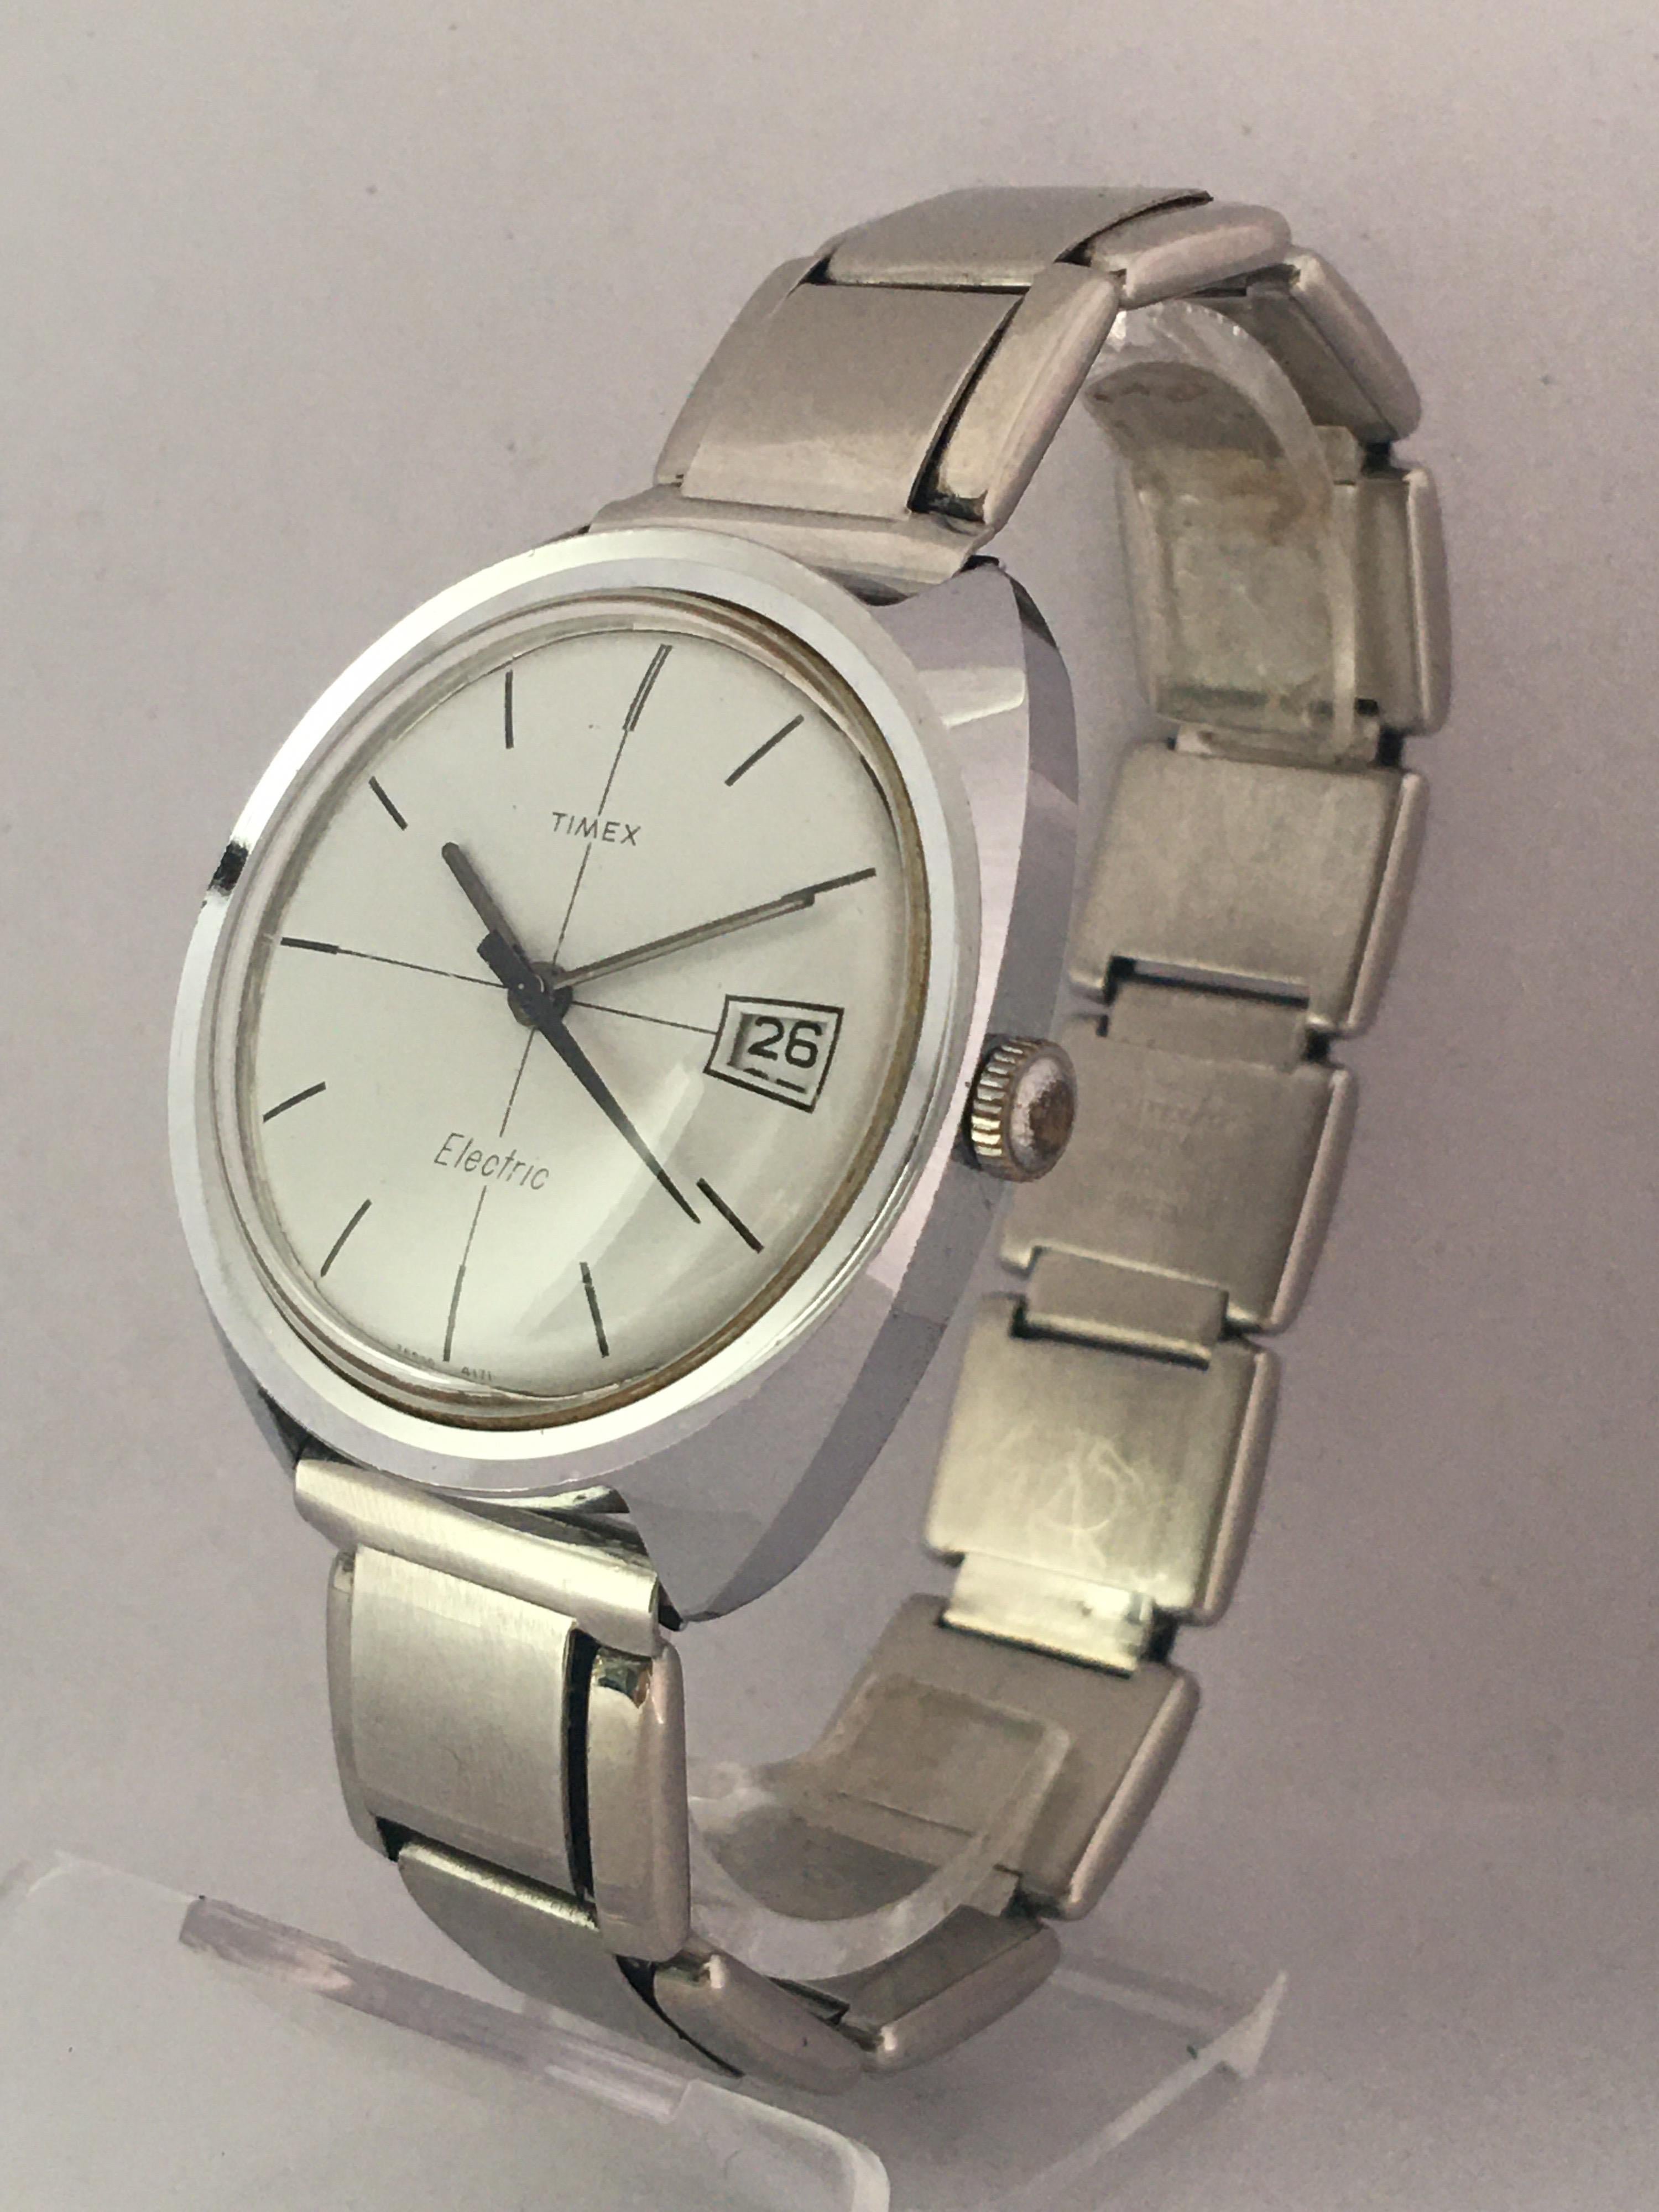 This beautiful pre-owned 36mm diameter battery operated watch is in good working condition and it is running well. Visible signs of ageing and wear with light marks on the glass and on the watch case as shown. Fitted with a white metal 6.2 inches